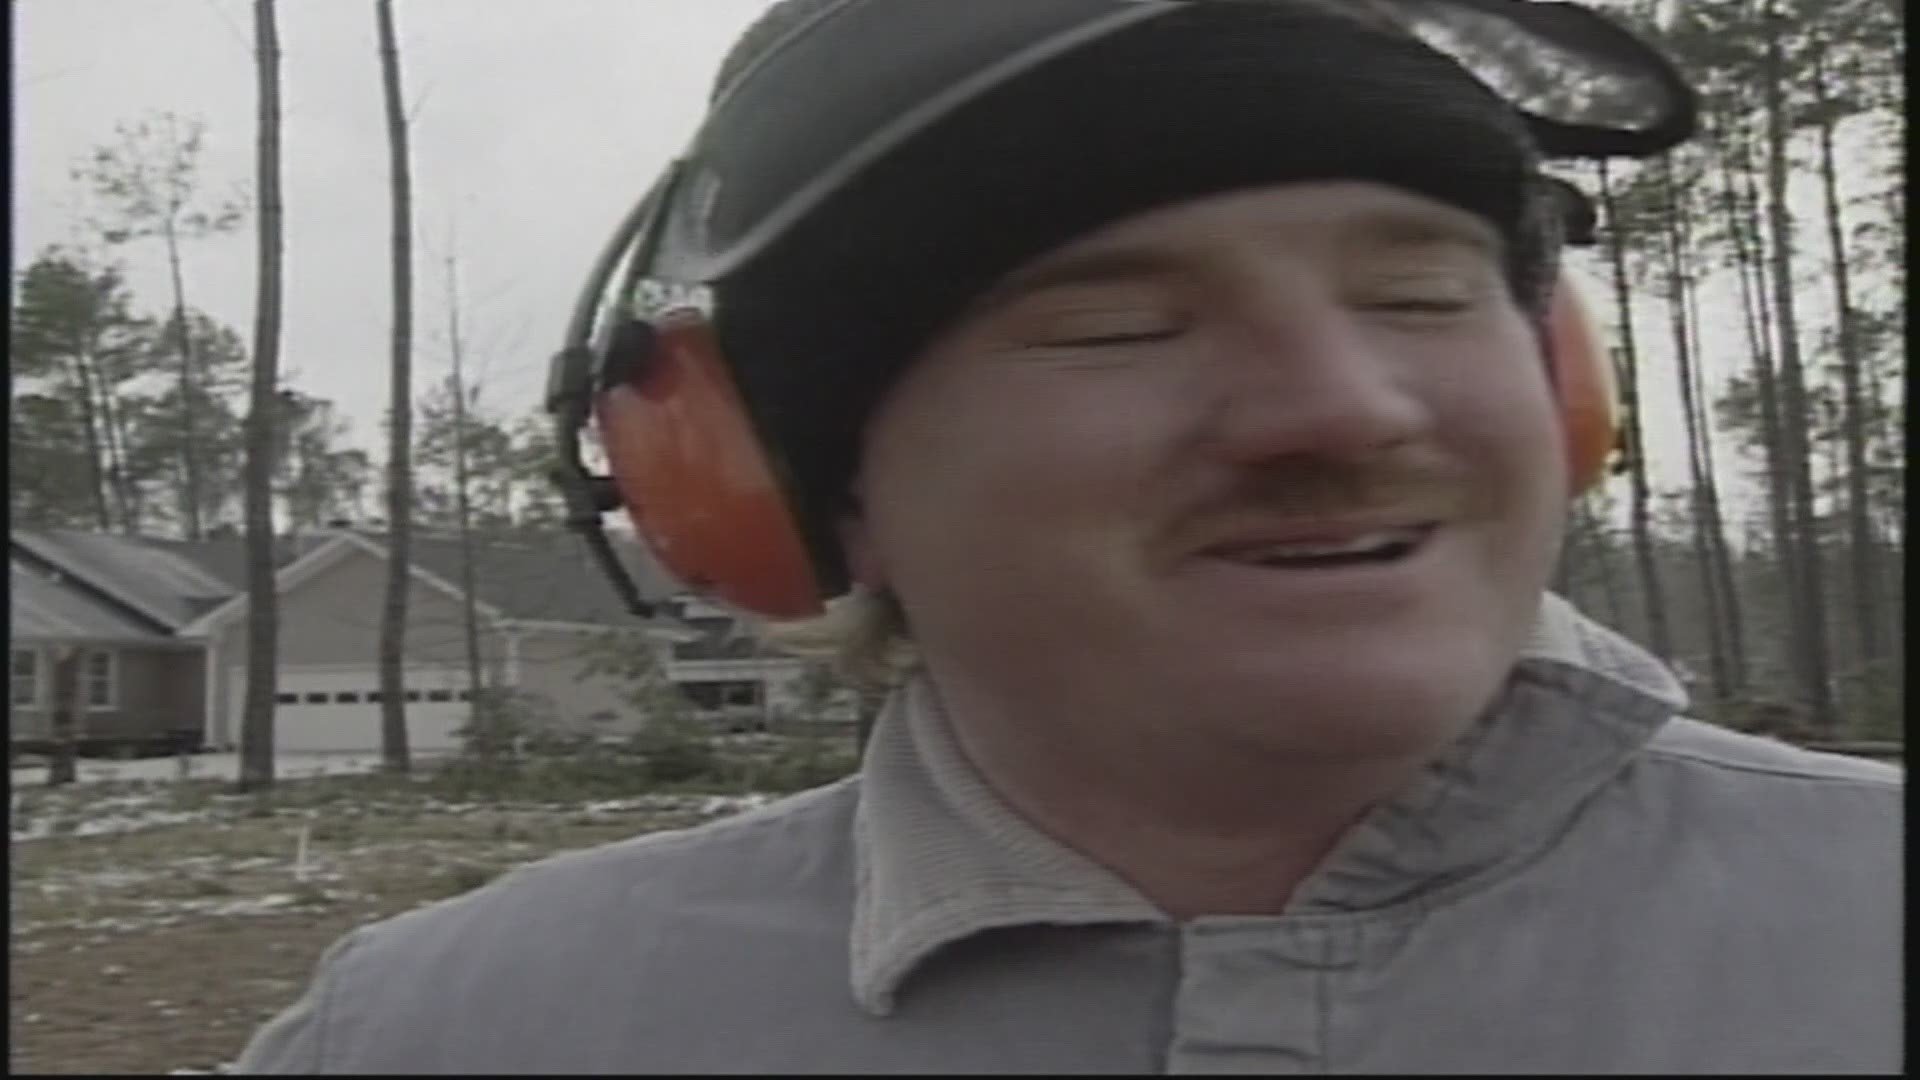 In 1993, people in Central Georgia and across the country experienced a massive blizzard. Here's archive footage the day after the storm came through in March.